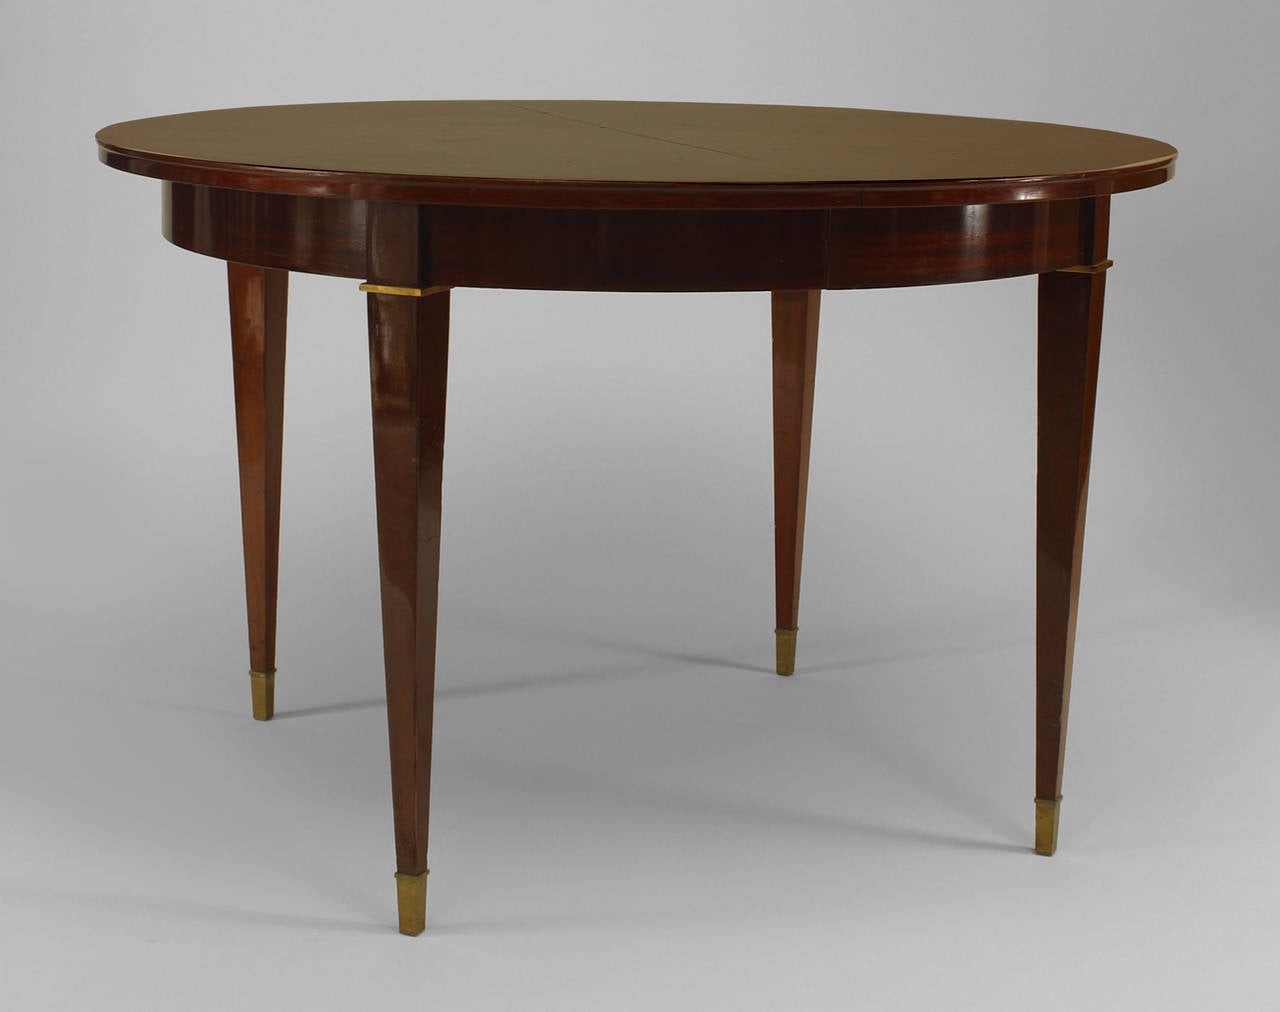 Attributed to Dominique, French 1950's round palisander wood dining table with a sunburst design top supported on 4 square tapered legs with bronze trim and sabot feet.